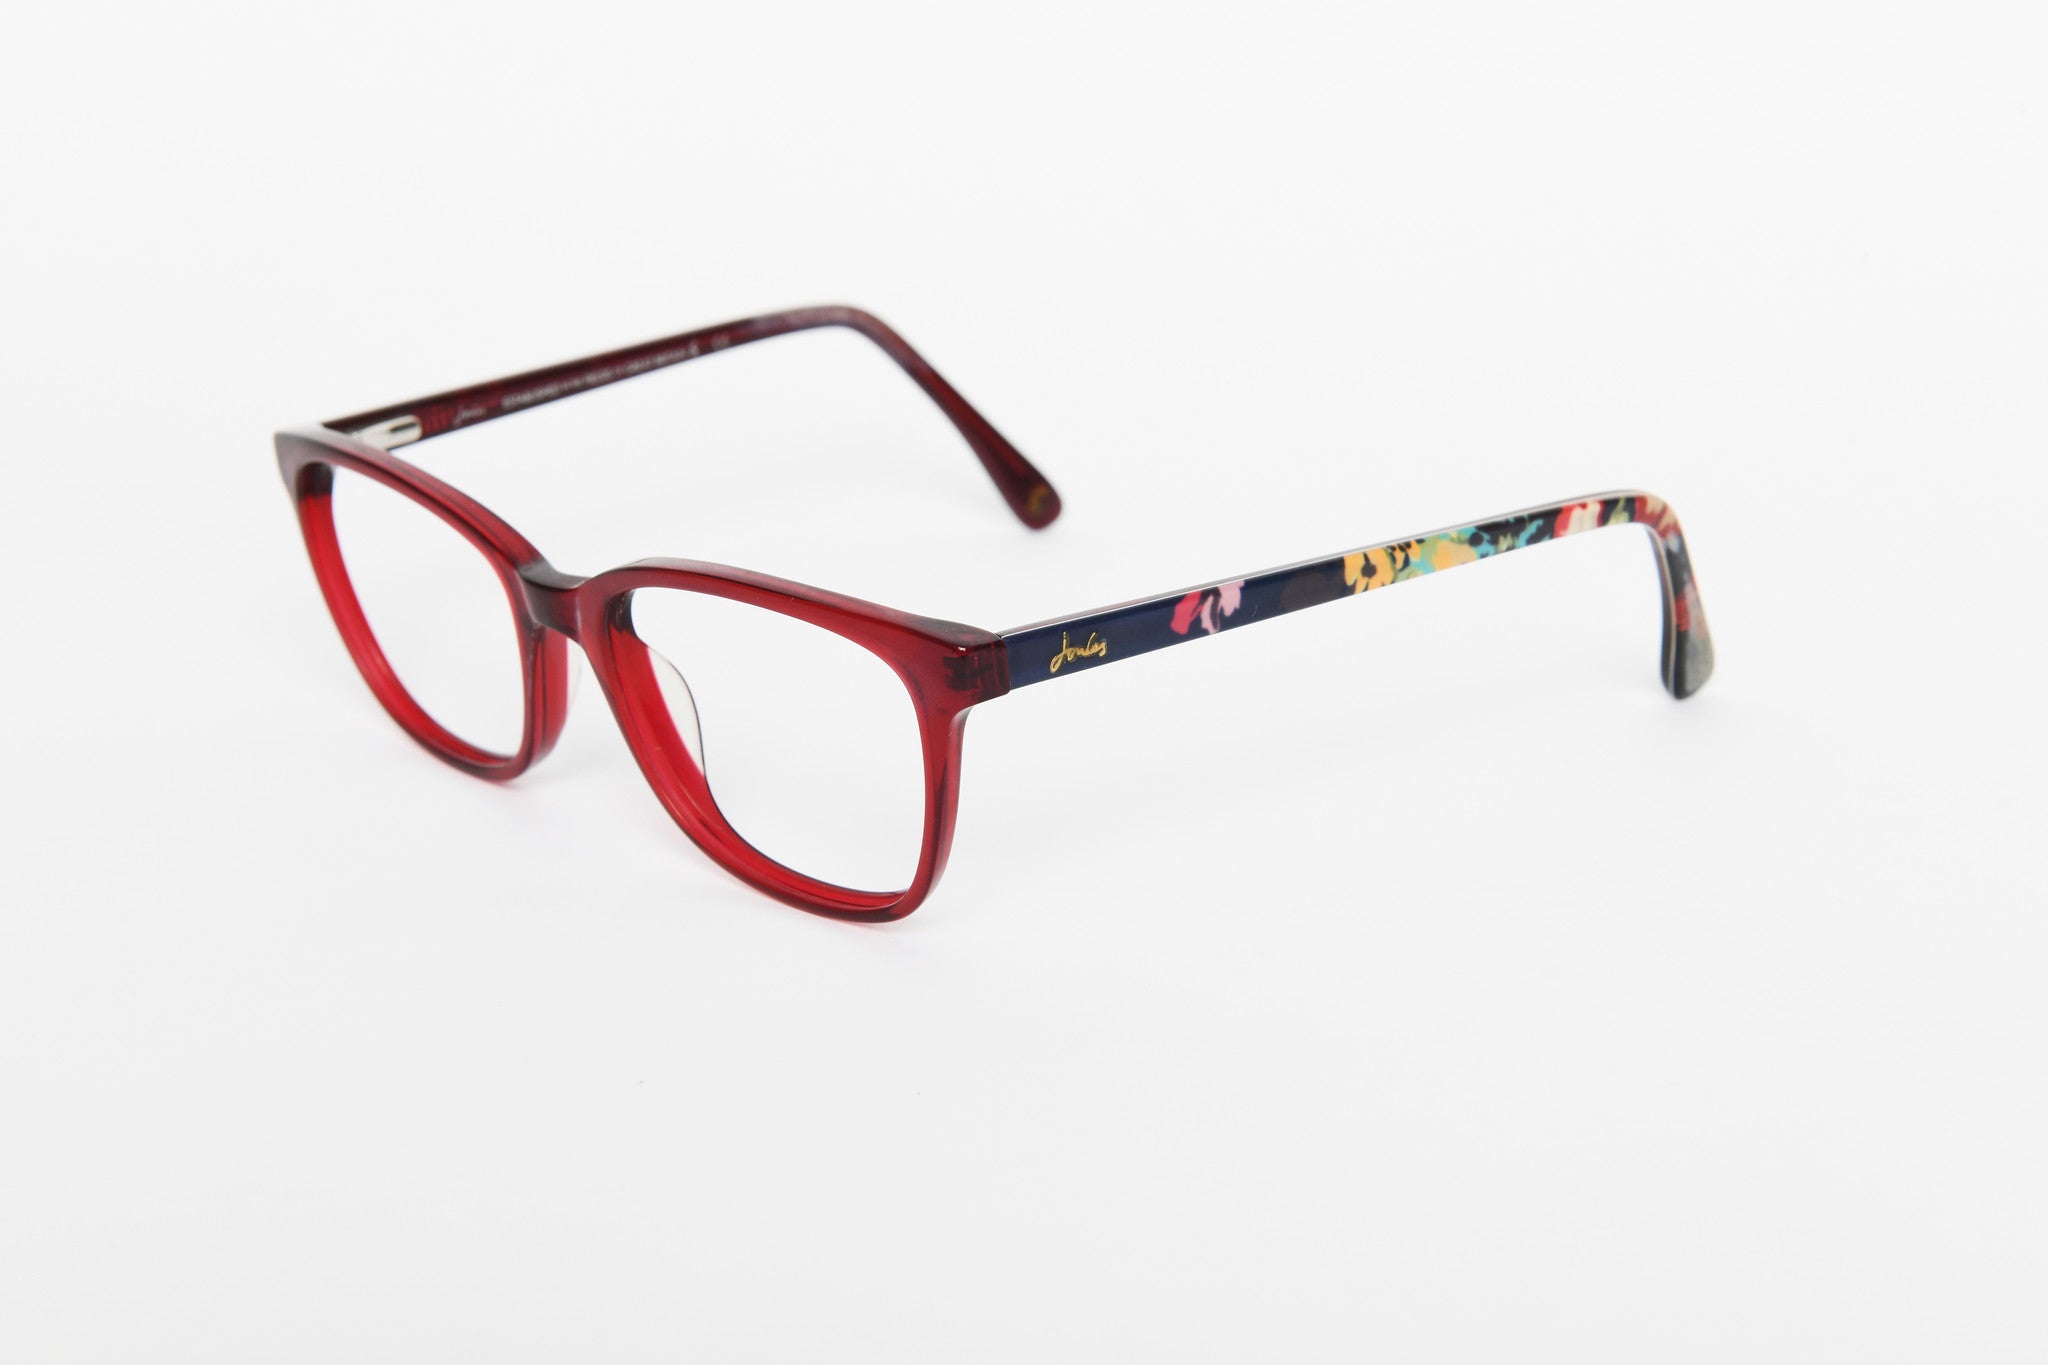 Joules red designer glasses. Joules women's glasses. Designer women's glasses. Cheap designer glasses. Sustainable eyewear.